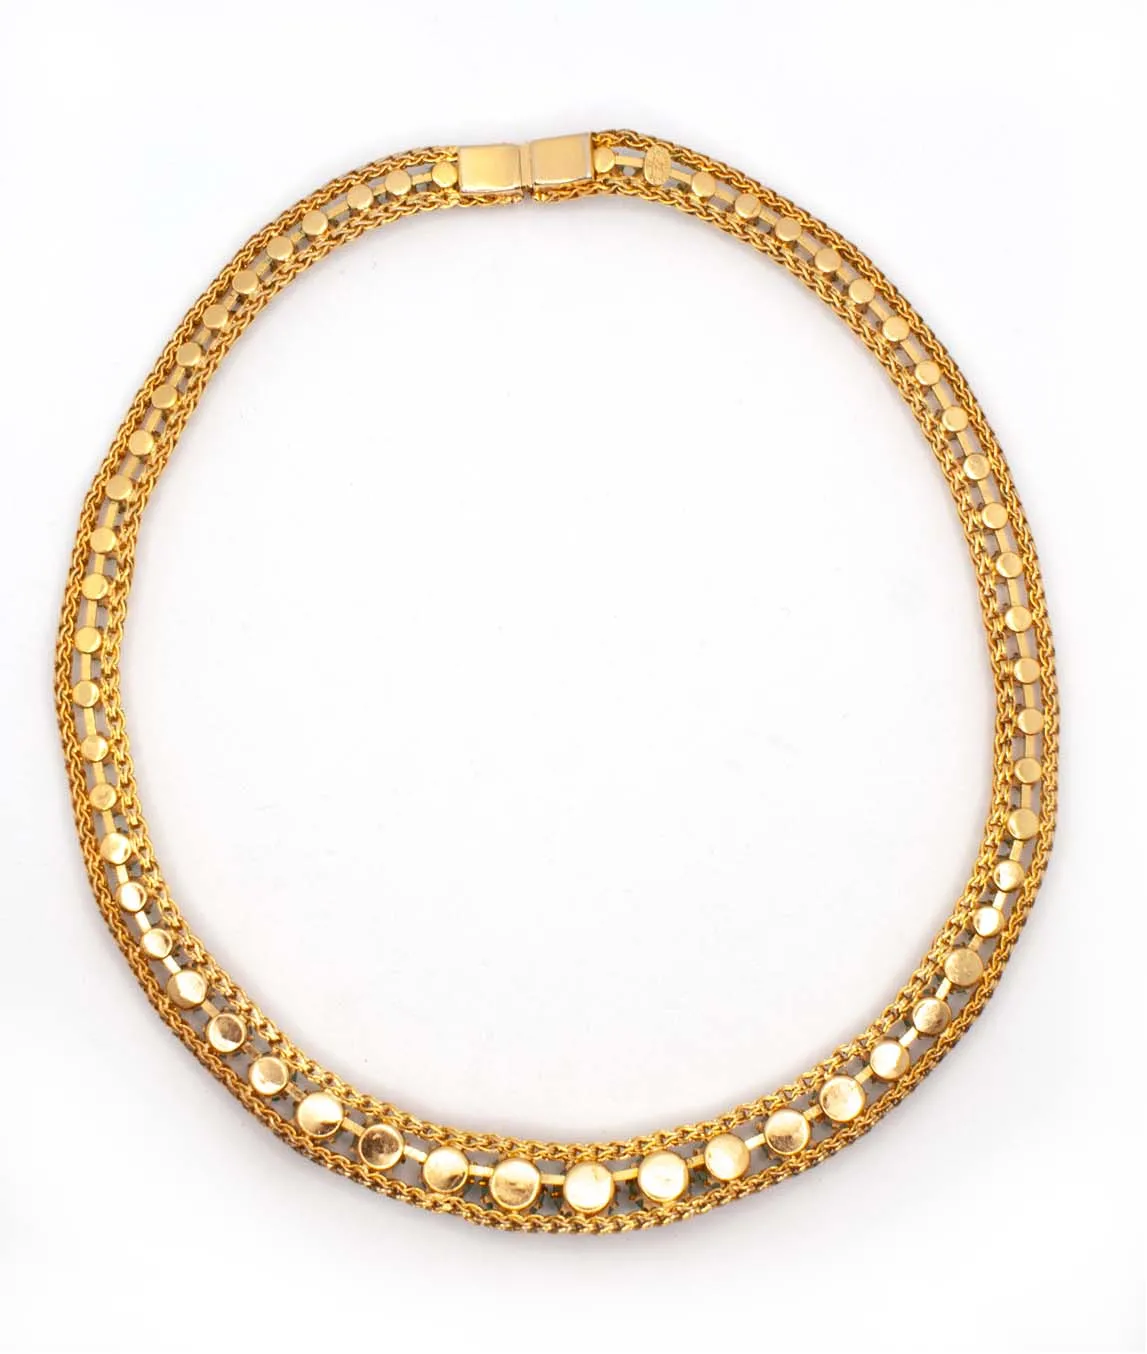 Back of gold plated choker necklace by Christian Dior